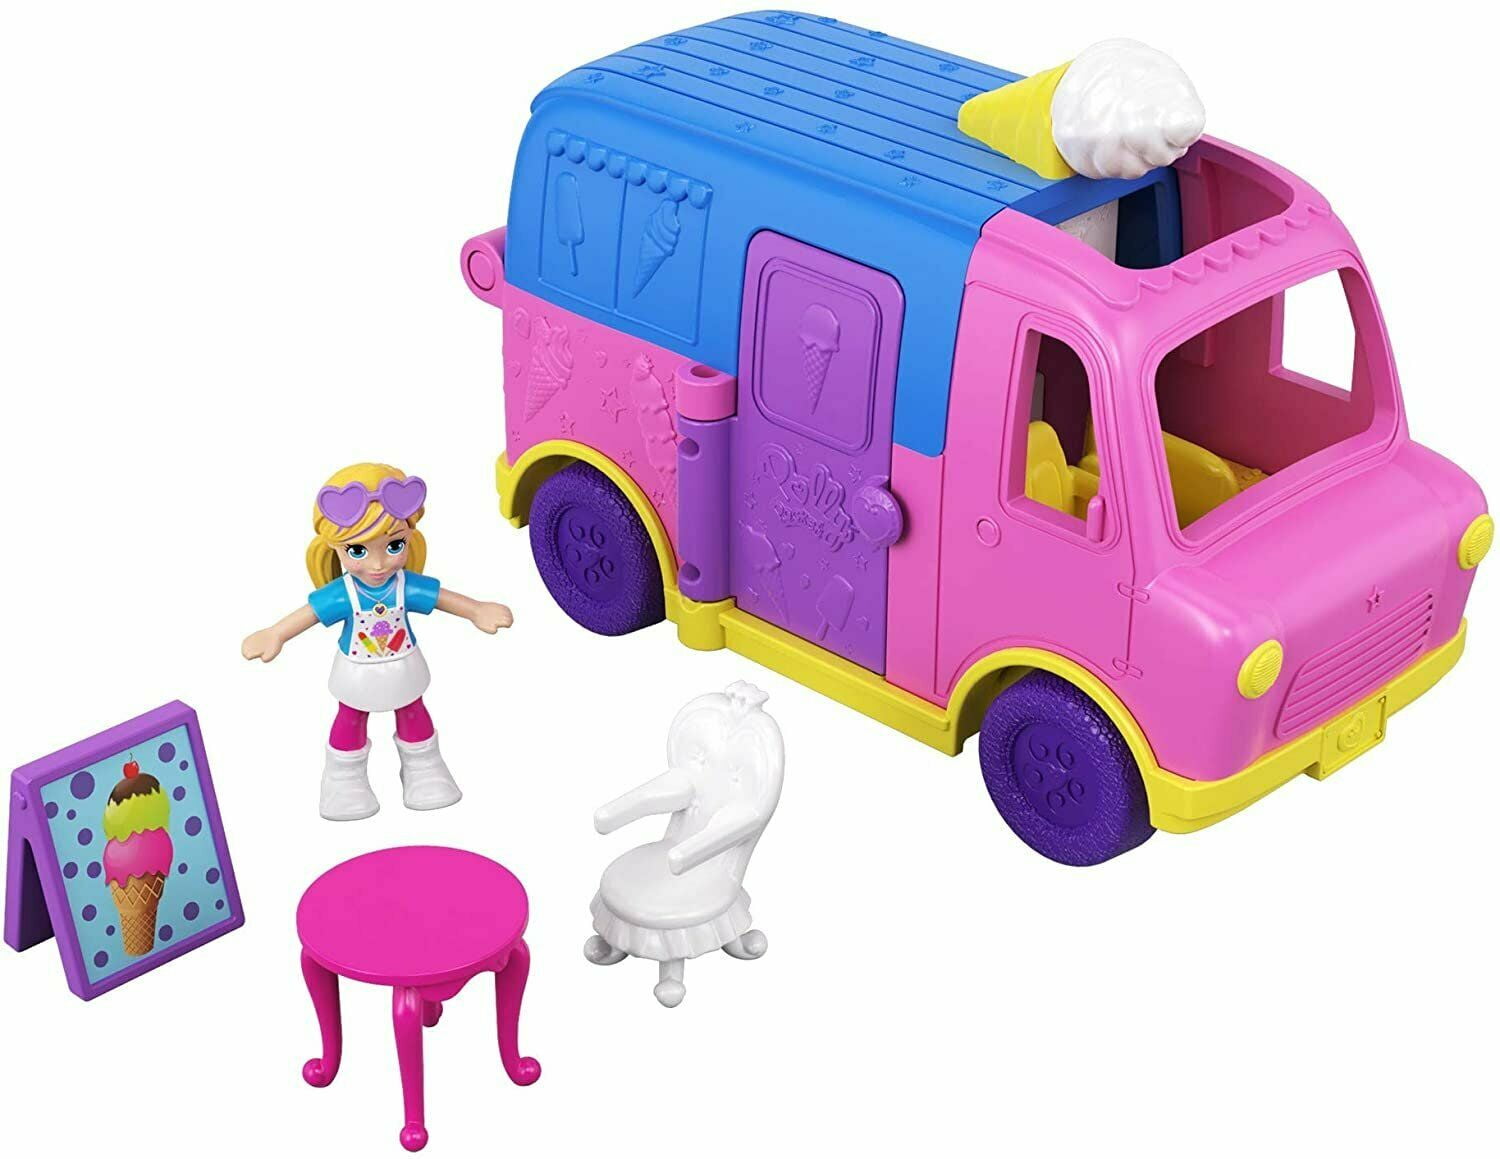 Polly Pocket Party Limo Micro playset New pollyville 